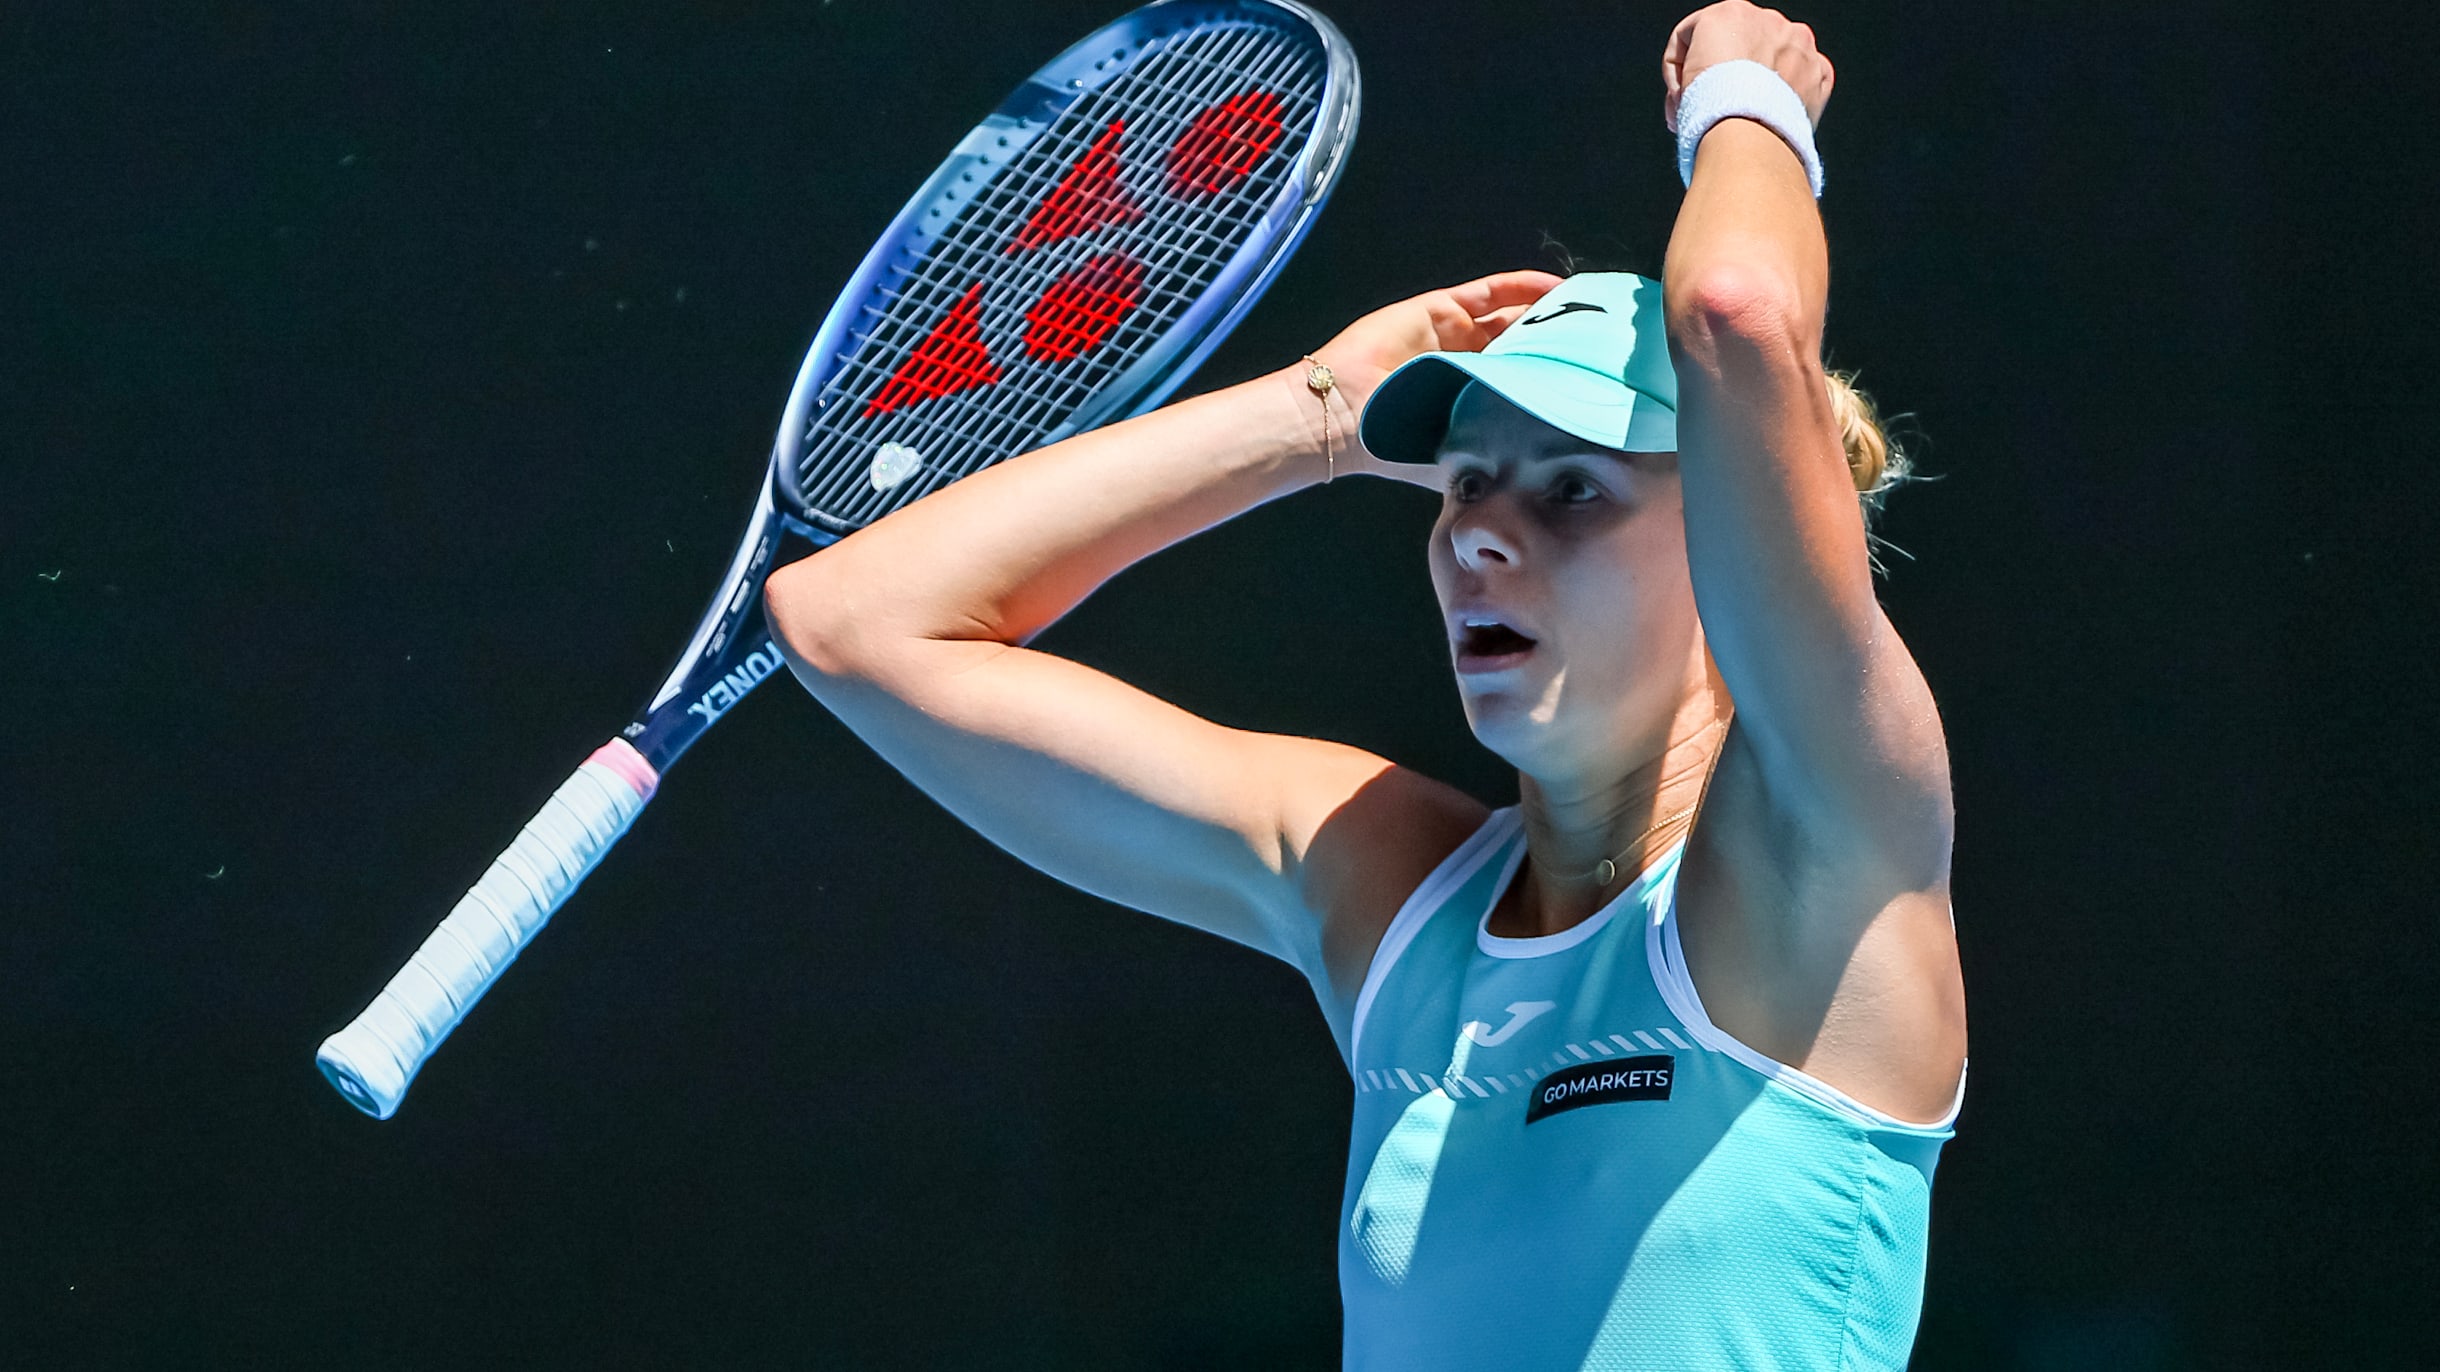 How a change of mentality powered Magda Linettes run at 2023 Australian Open